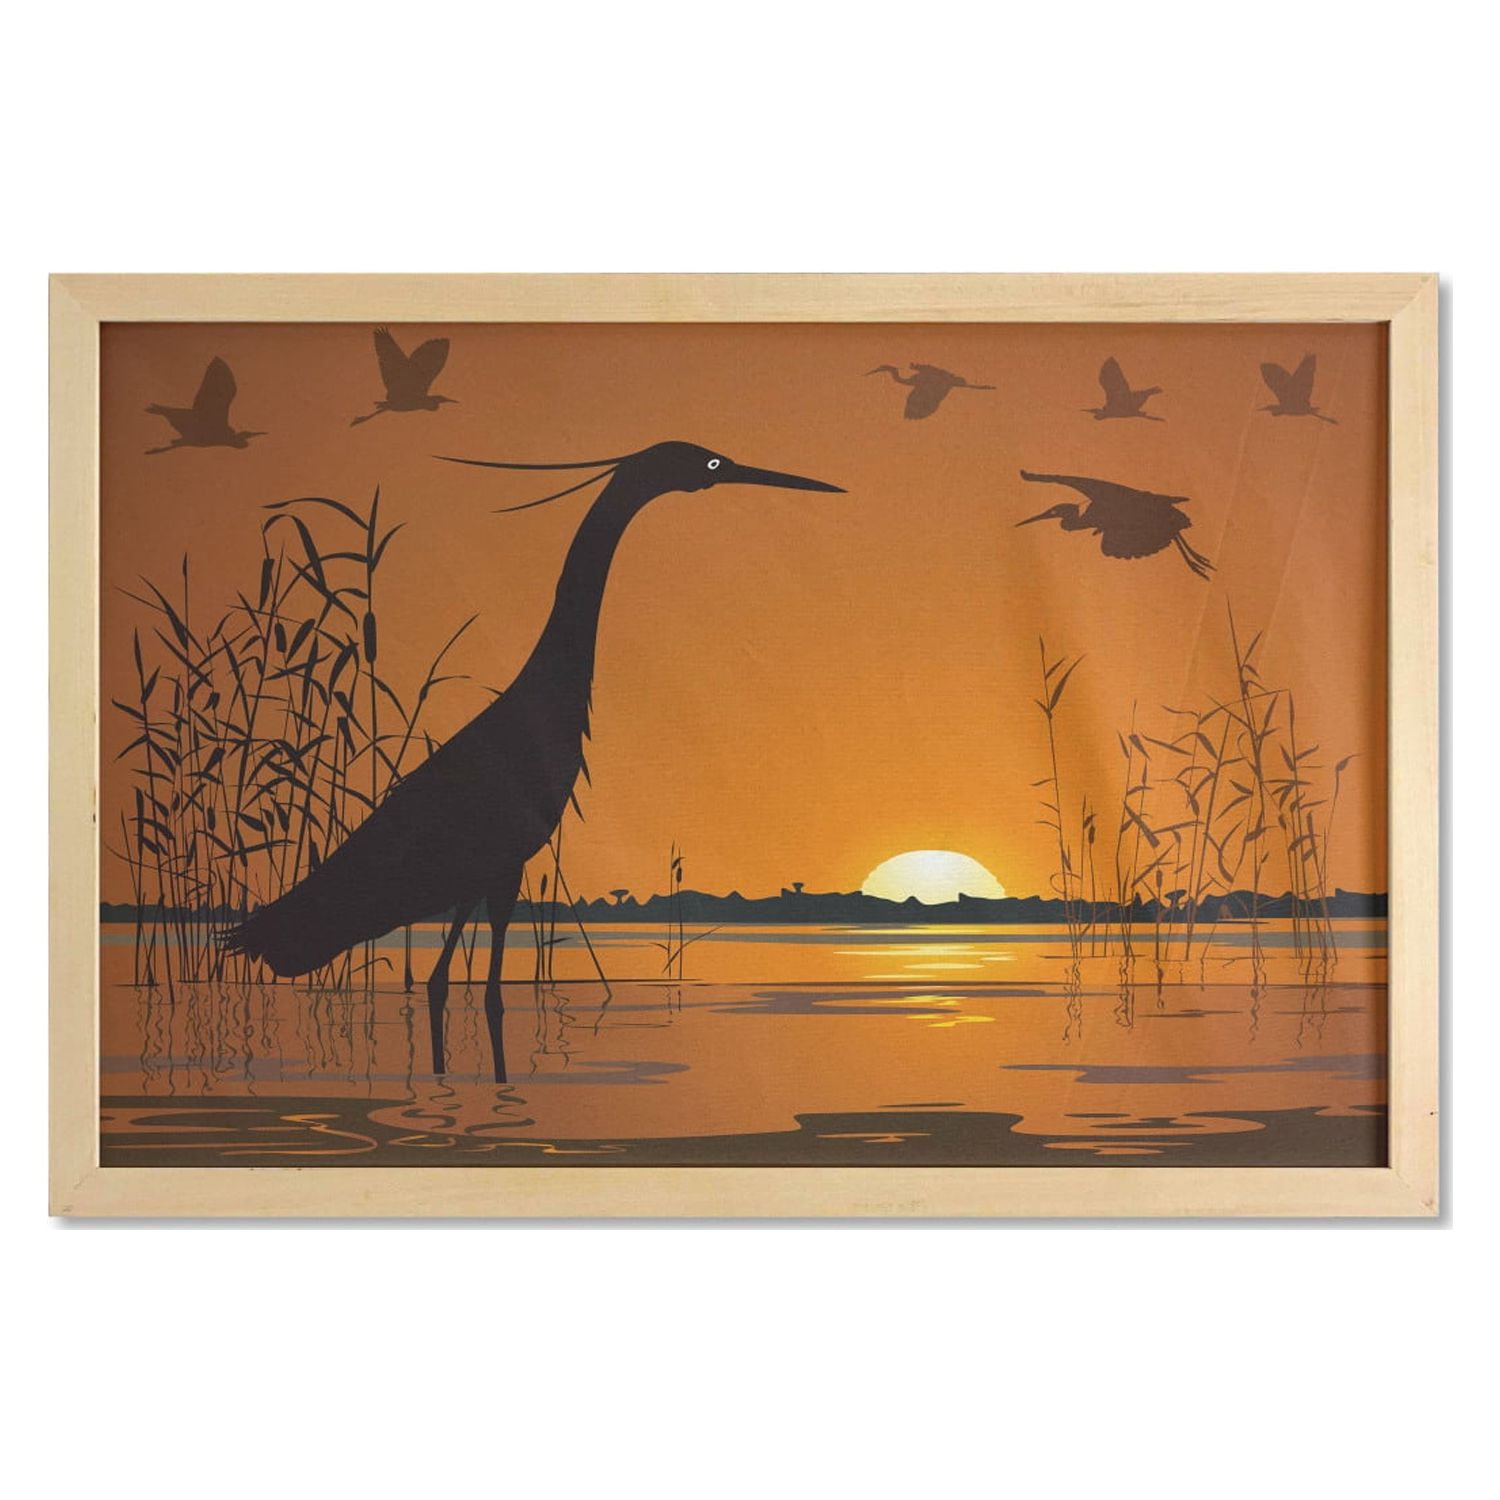 Egret Wall Art with Frame, Nature Themed Bird Silhouettes at Sunset in Swamp,  Printed Fabric Poster for Bathroom Living Room Dorms, 35 x 23, Cinnamon  Brown, by Ambesonne 